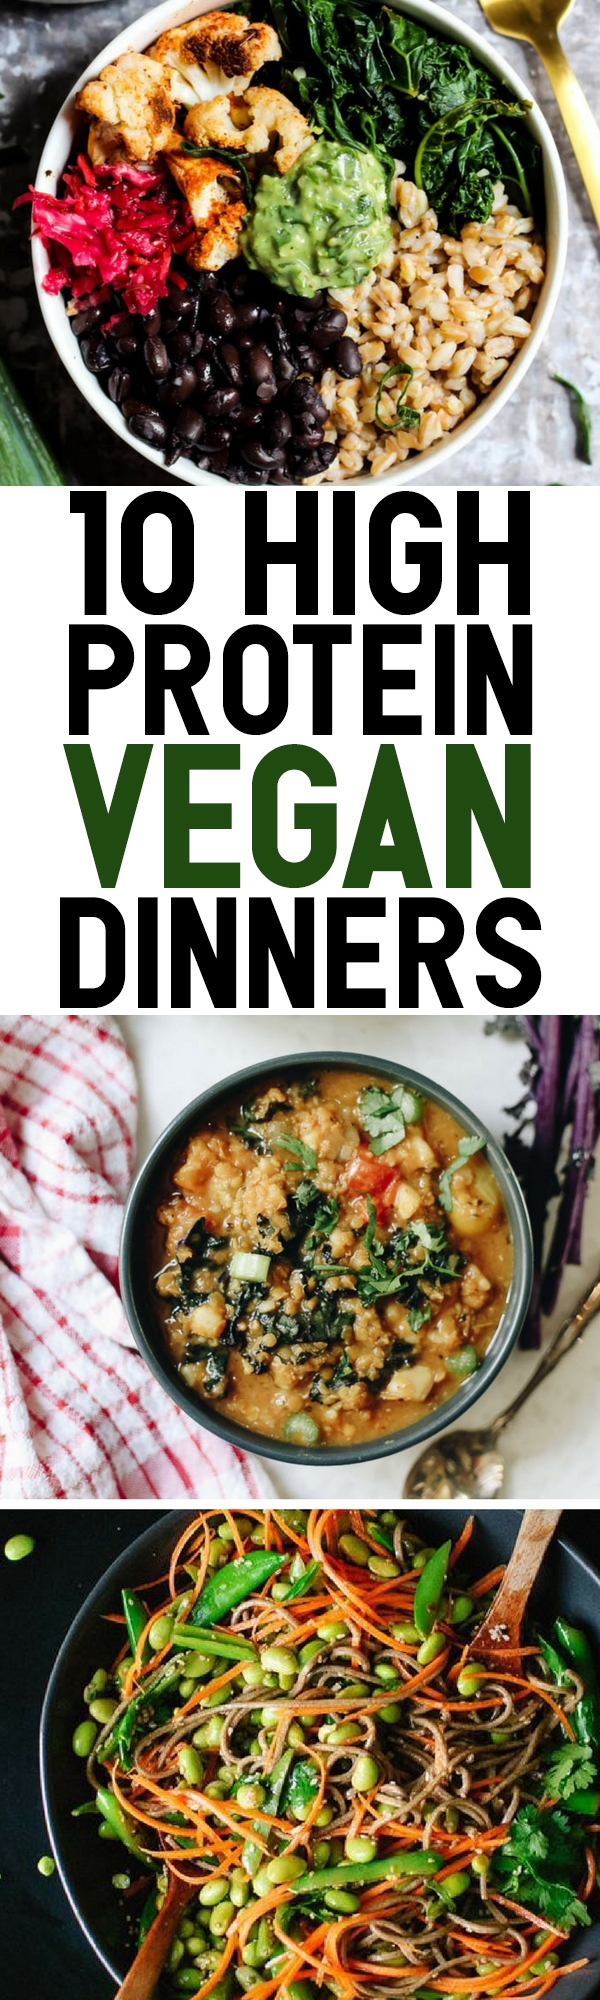 Looking for plant-based dinner ideas? Try some of these 10 High Protein Vegan Dinners to keep you satisfied and find your new go-to weeknight meals.